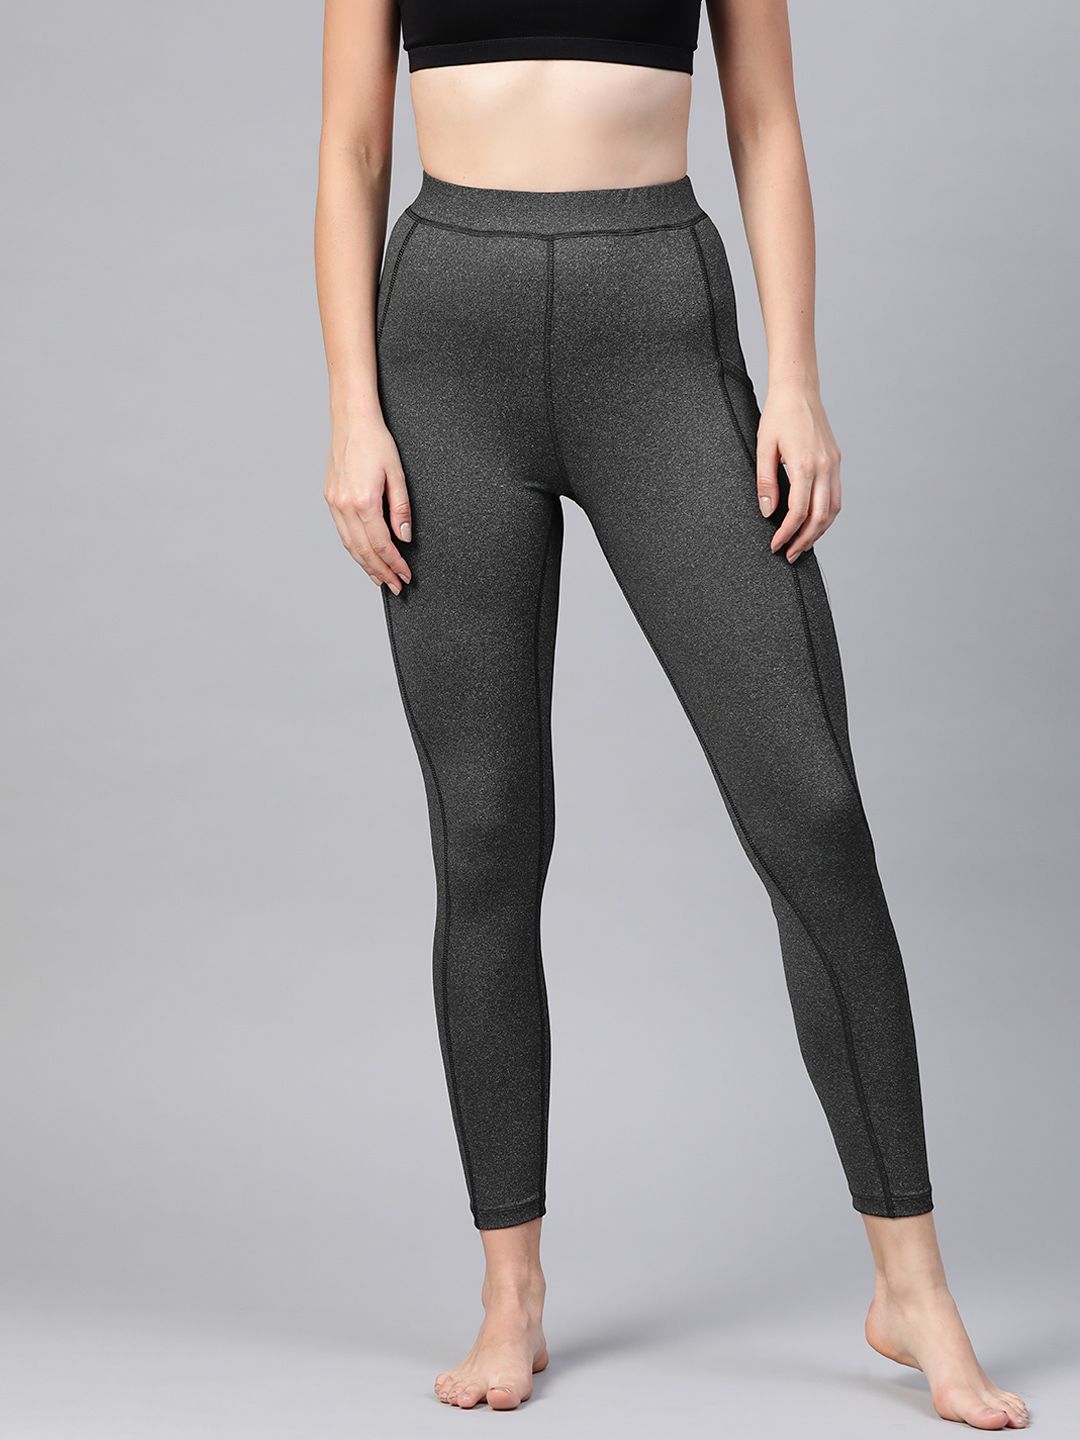 Chkokko Women Charcoal Grey Solid Cropped Yoga Tights Price in India